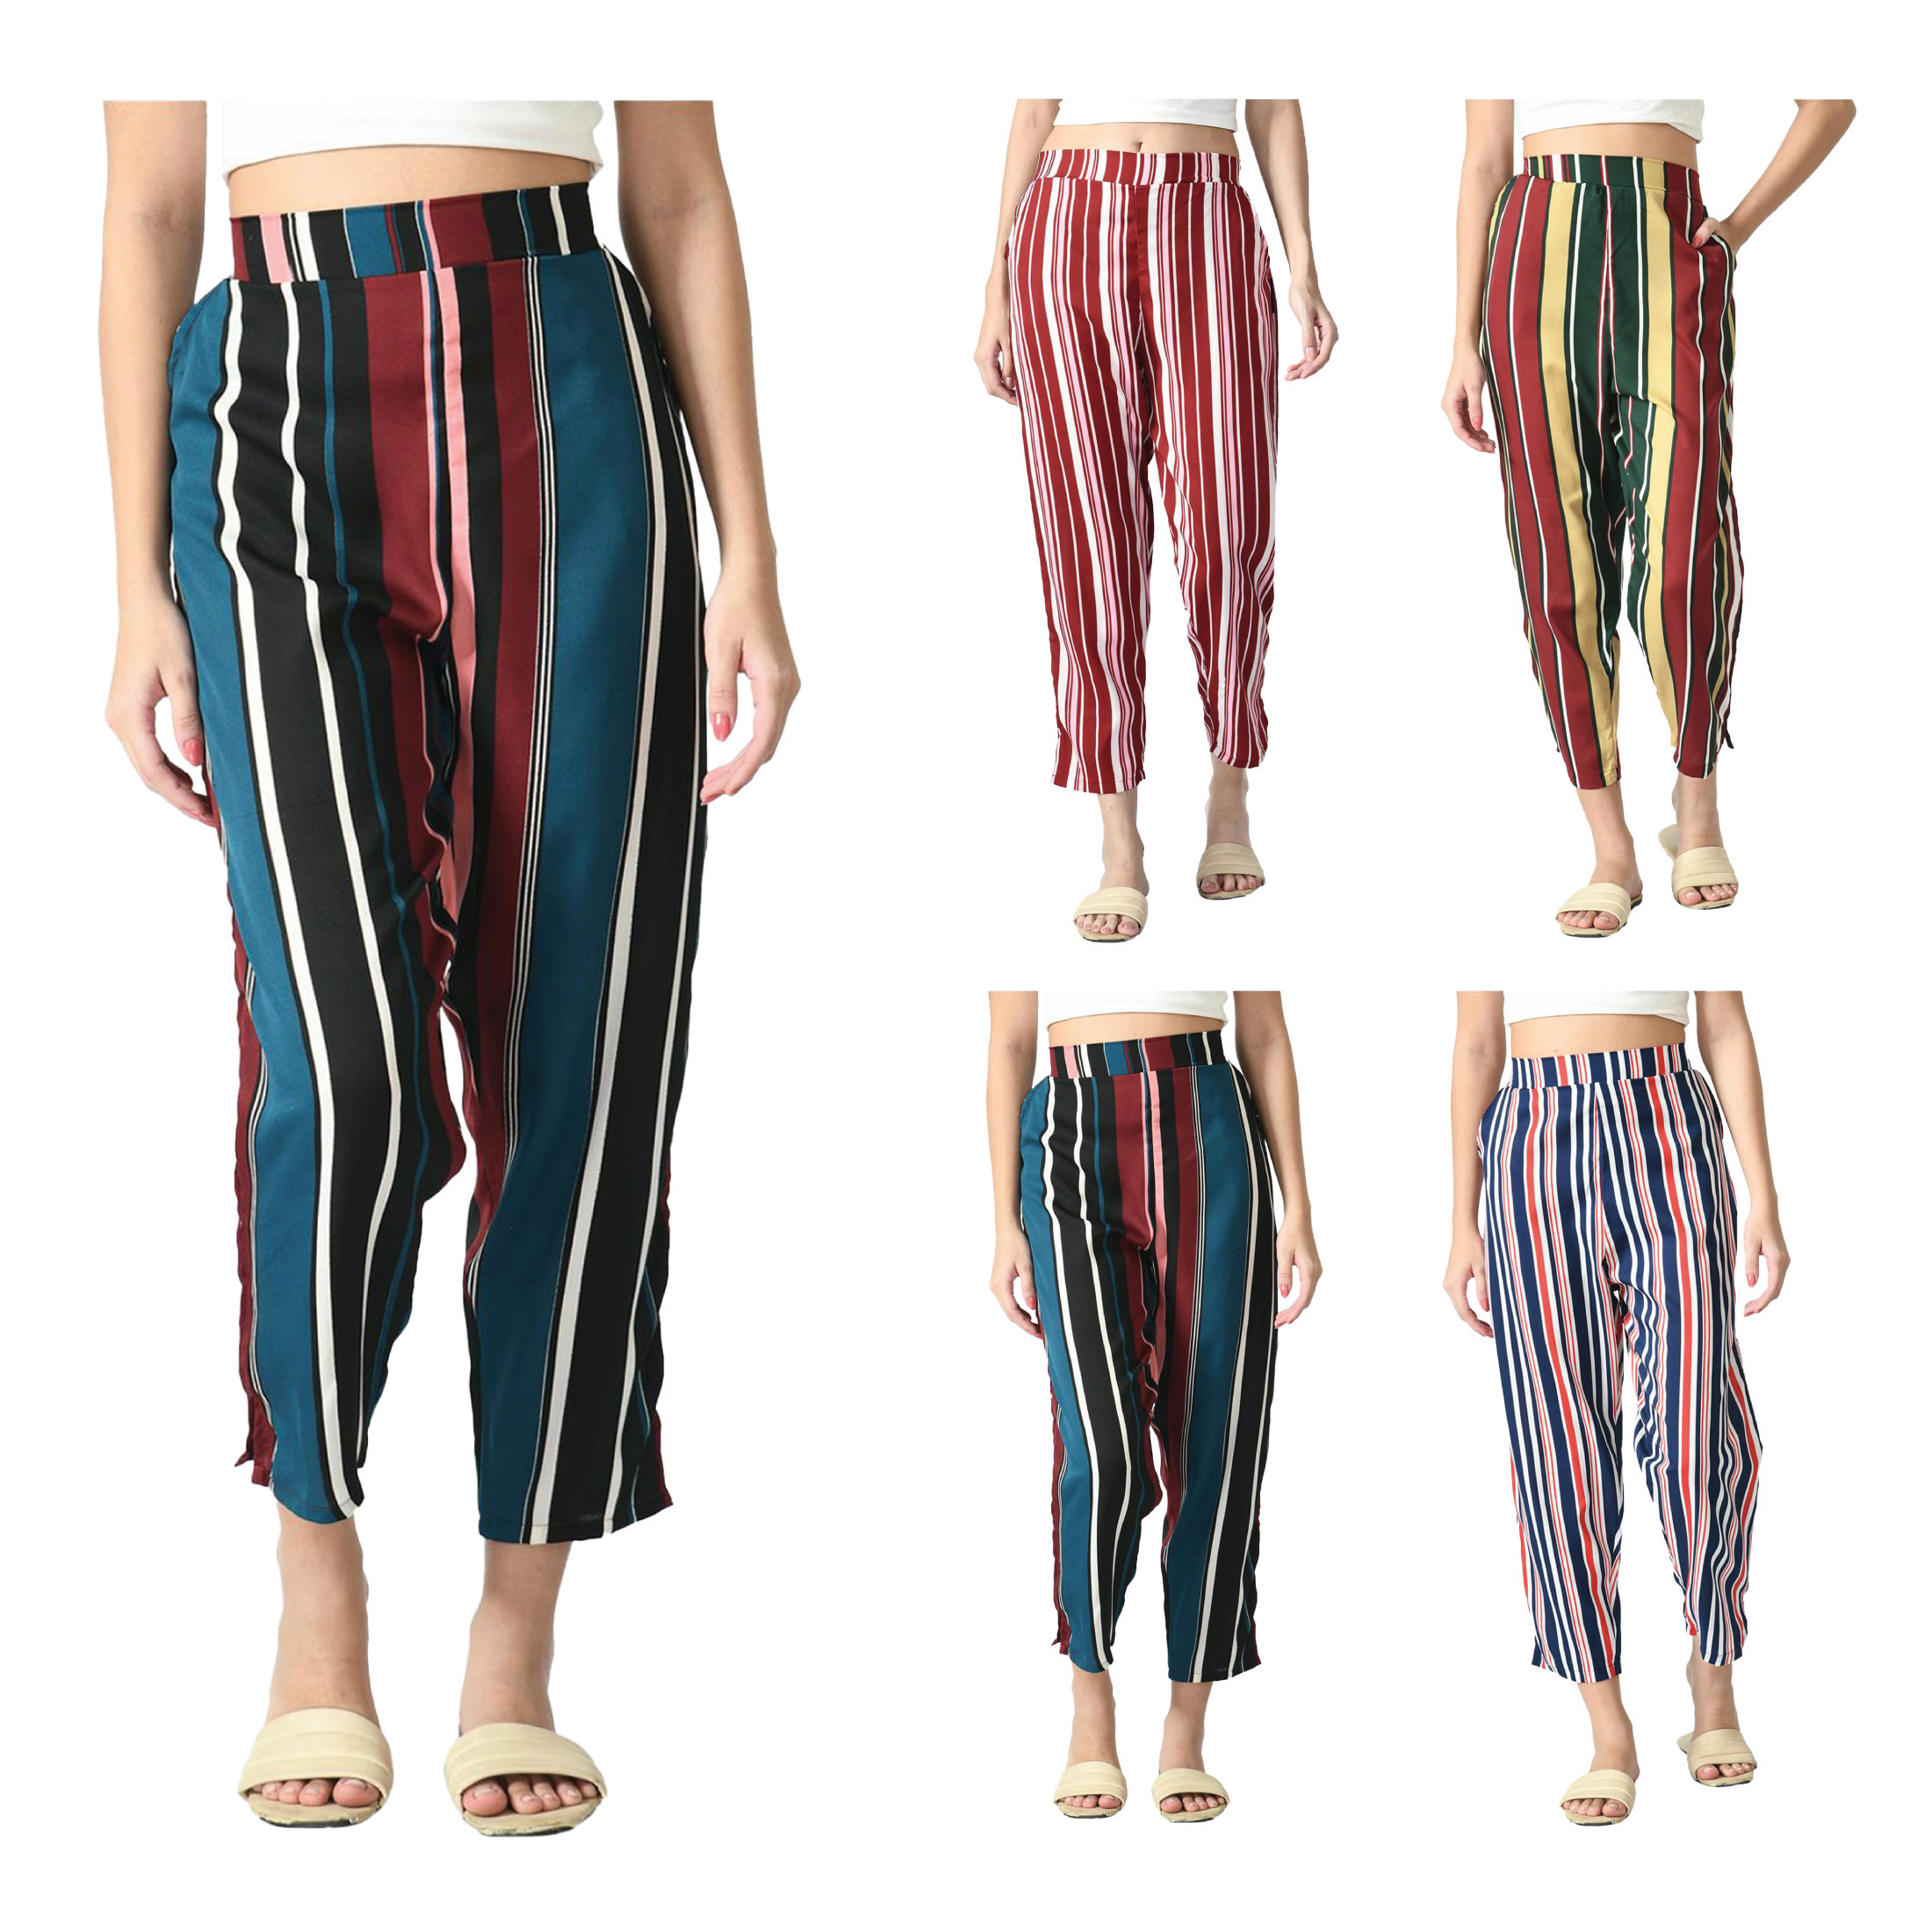 3-Pack Women's Cotton Palazzo Pants Striped Print Soft & Comfortable Western Style Regular Fit Ladies Trouser - XL